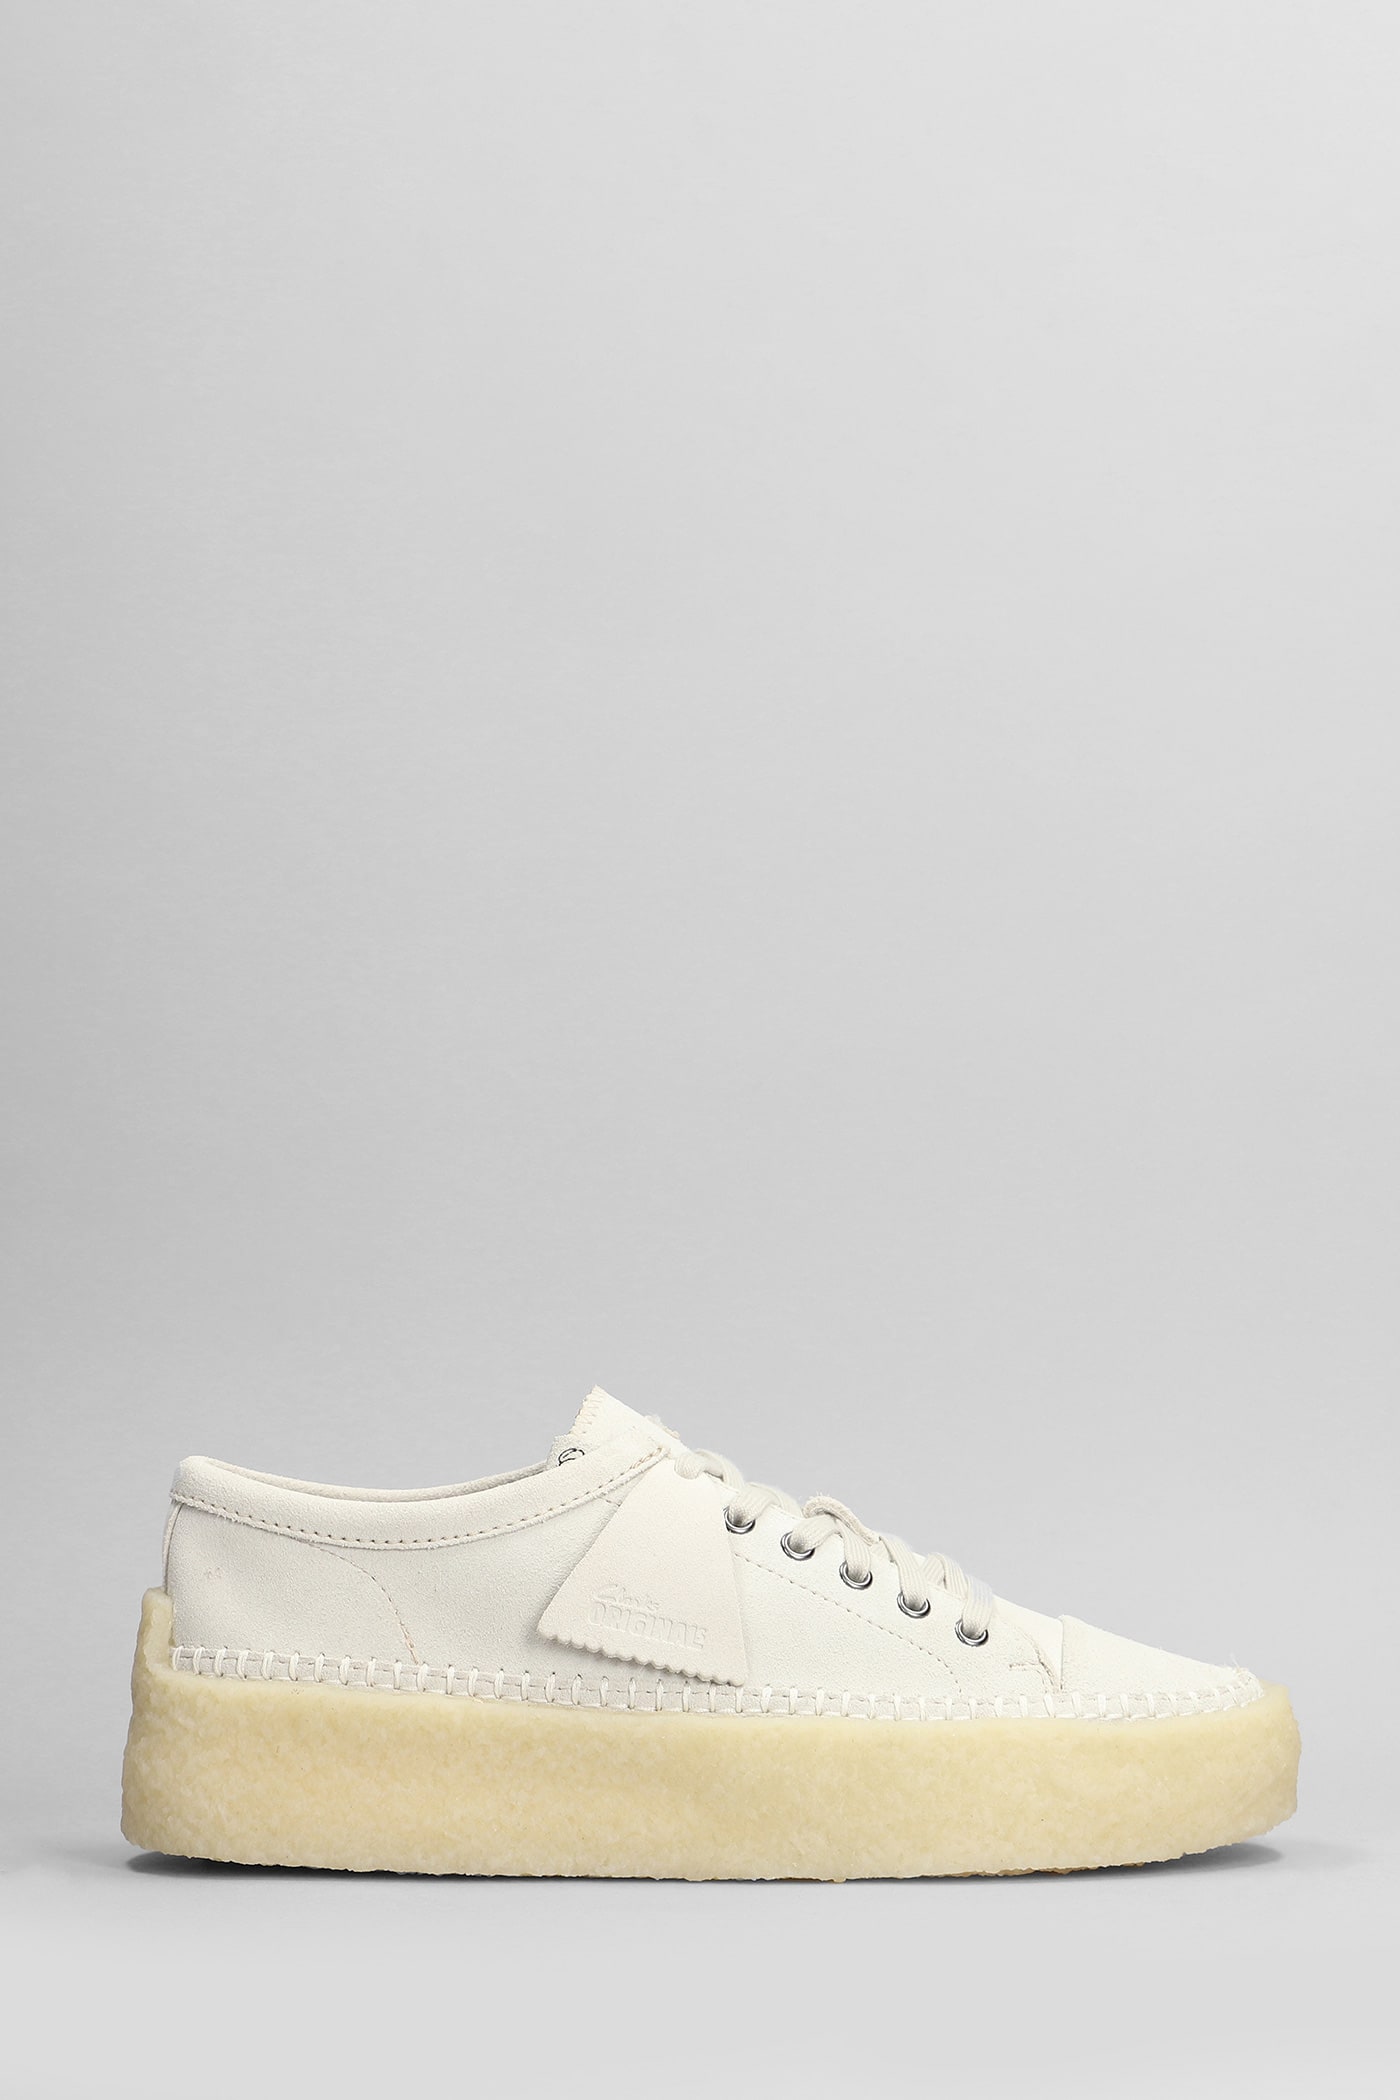 Caravan Low Lace Up Shoes In White Suede